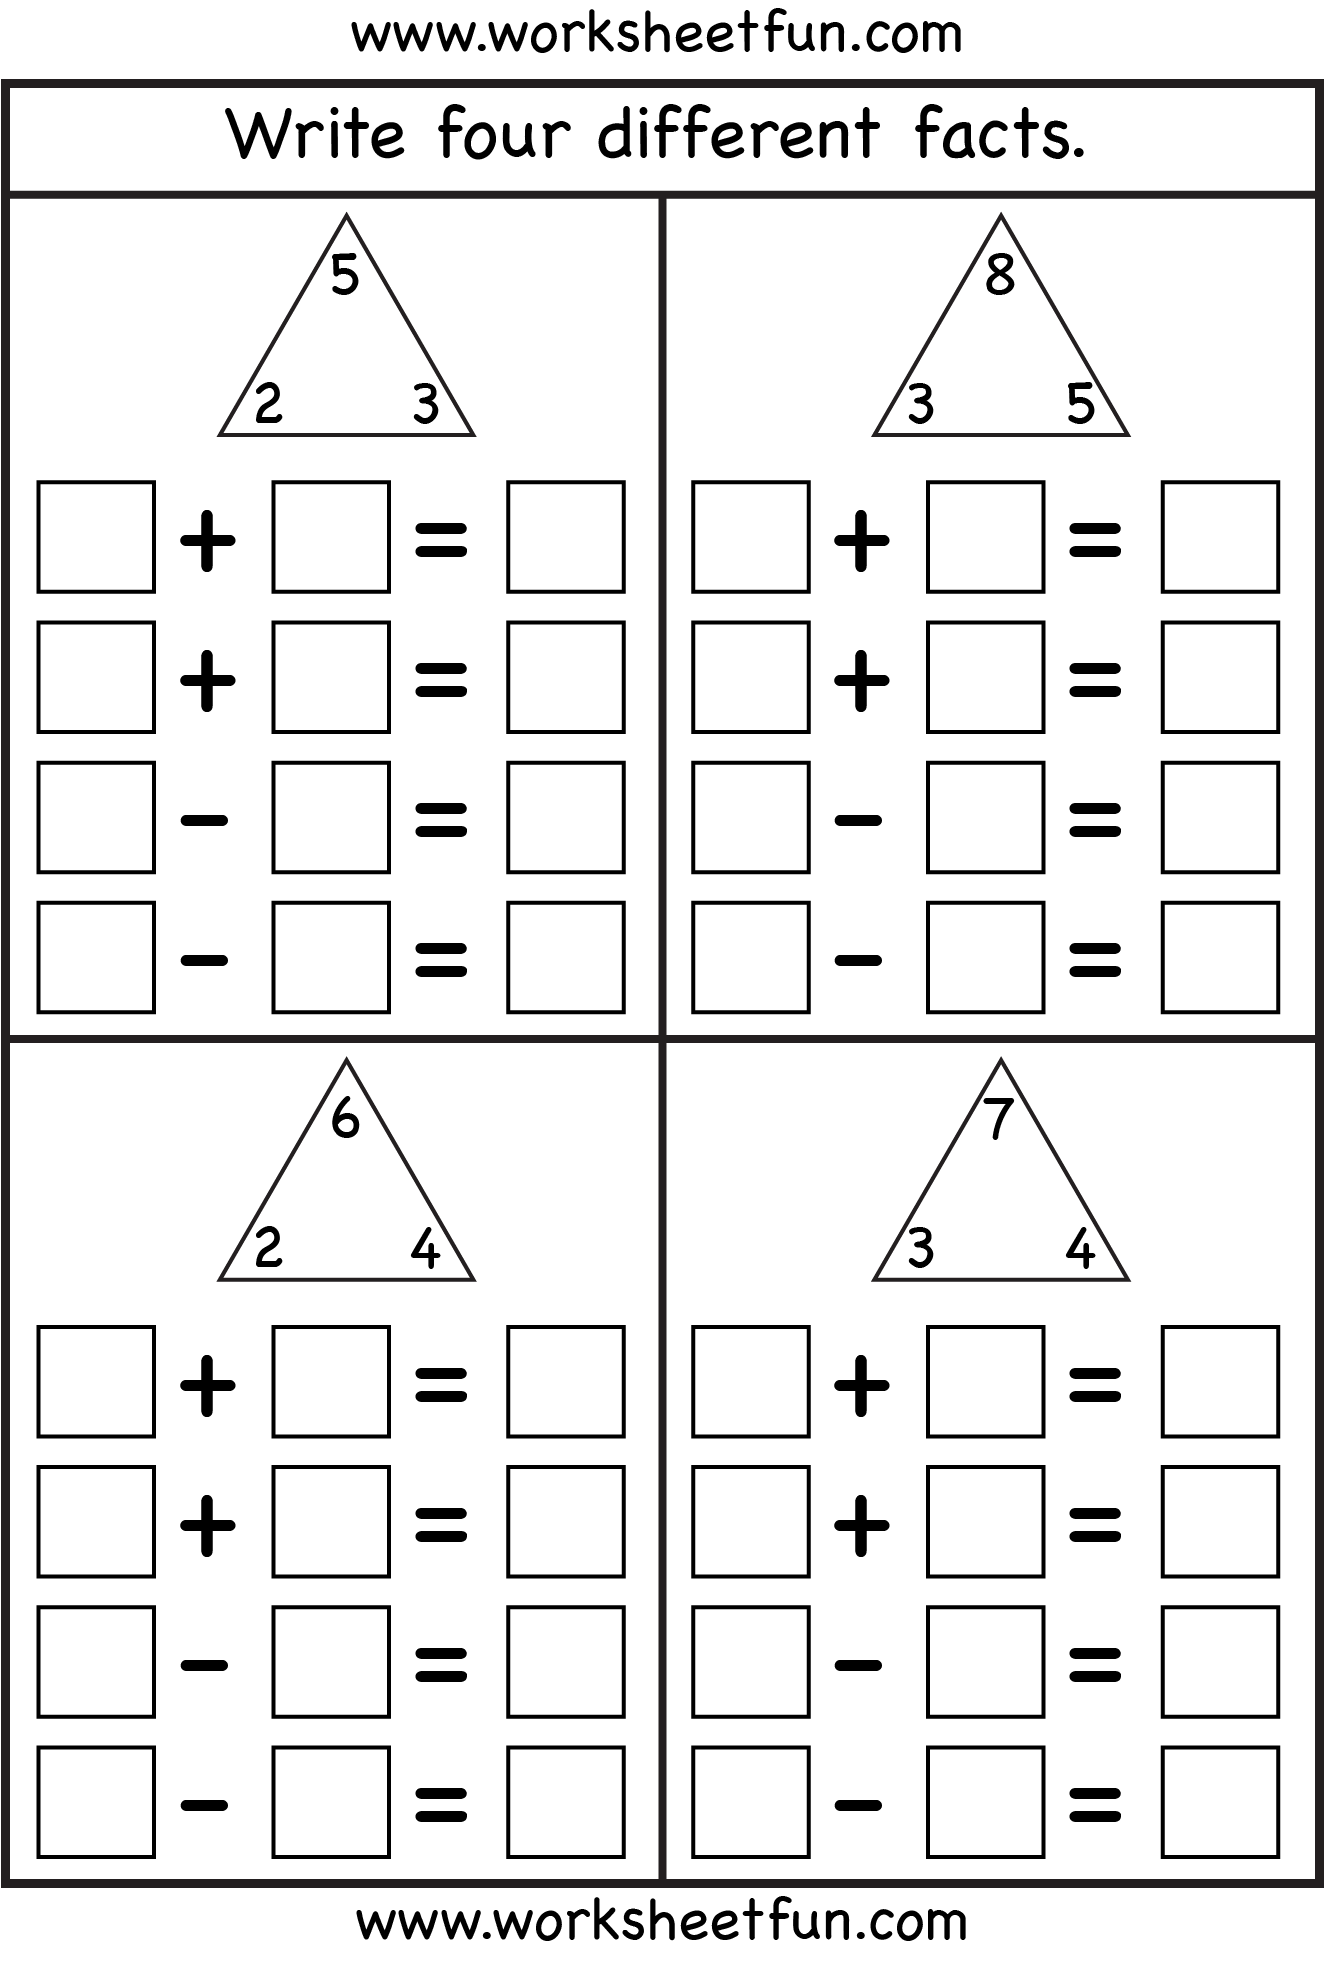 Fact Family – Complete Each Fact Family – 4 Worksheets